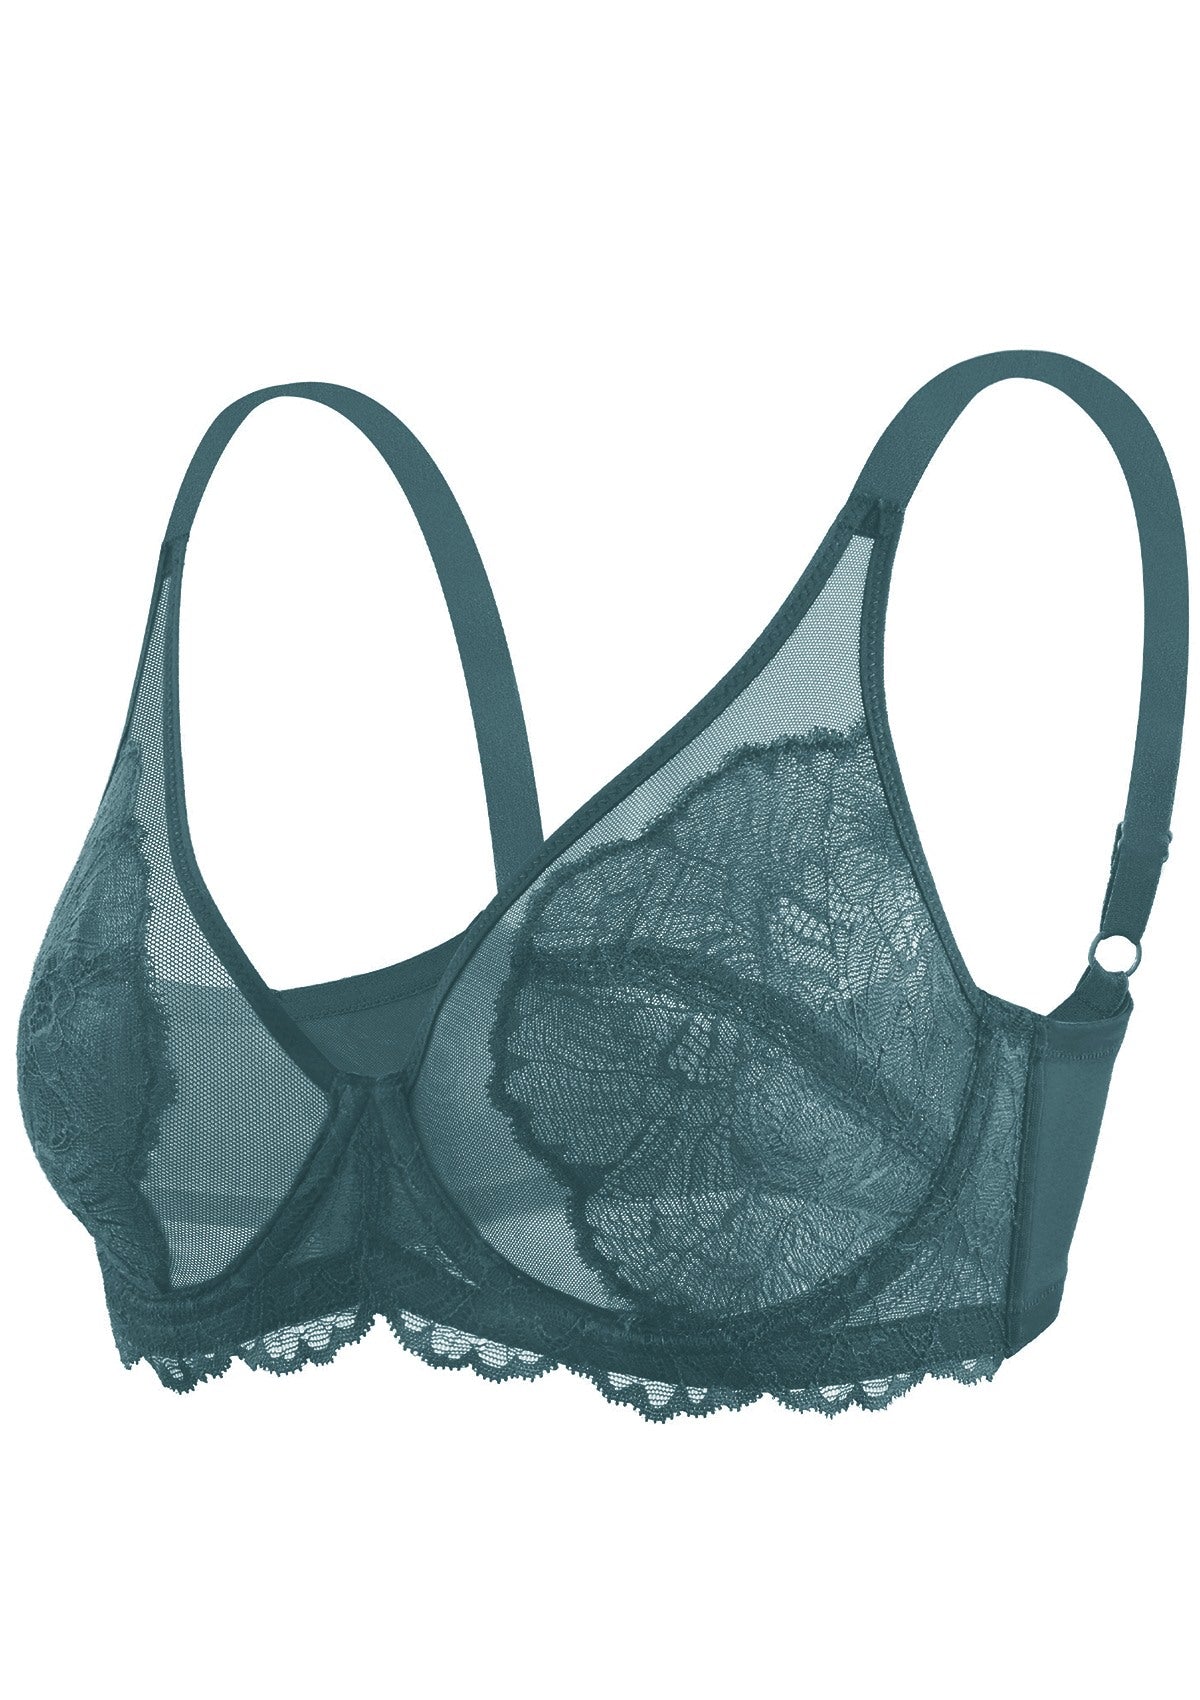 HSIA Blossom Full Figure See-Through Lace Bra For Side And Back Fat - Balsam Blue / 34 / DDD/F